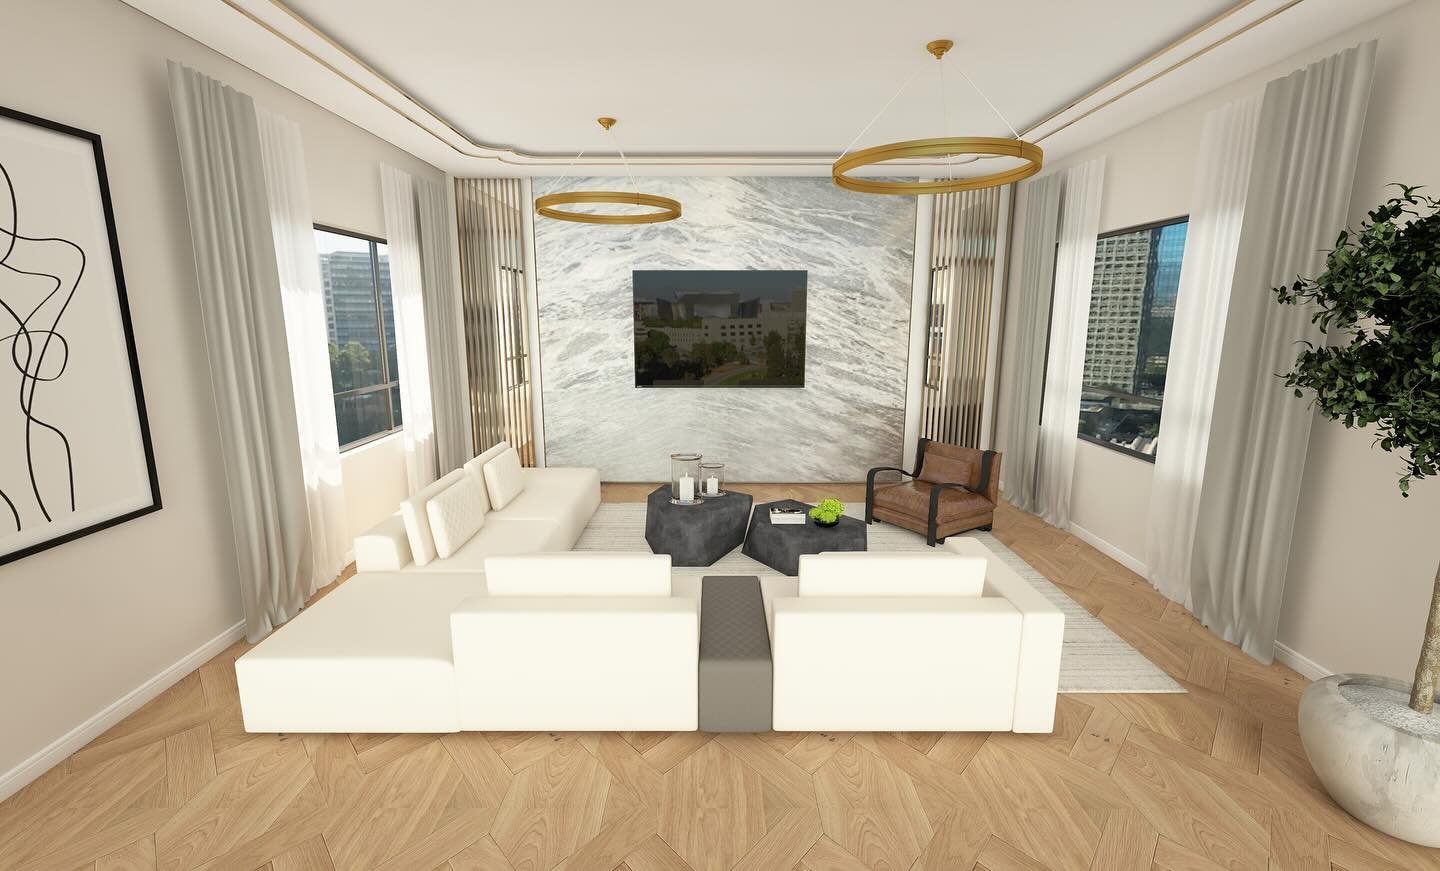 I love mixing modern and traditional elements to create a balanced, timeless design. #luxurydesign #luxuryapartments #luxuryliving #luxuryhomes #highenddesign #luxurylistings #highenddesigns #3drendering #3drender #3drenders #rendering3d #moderndesig